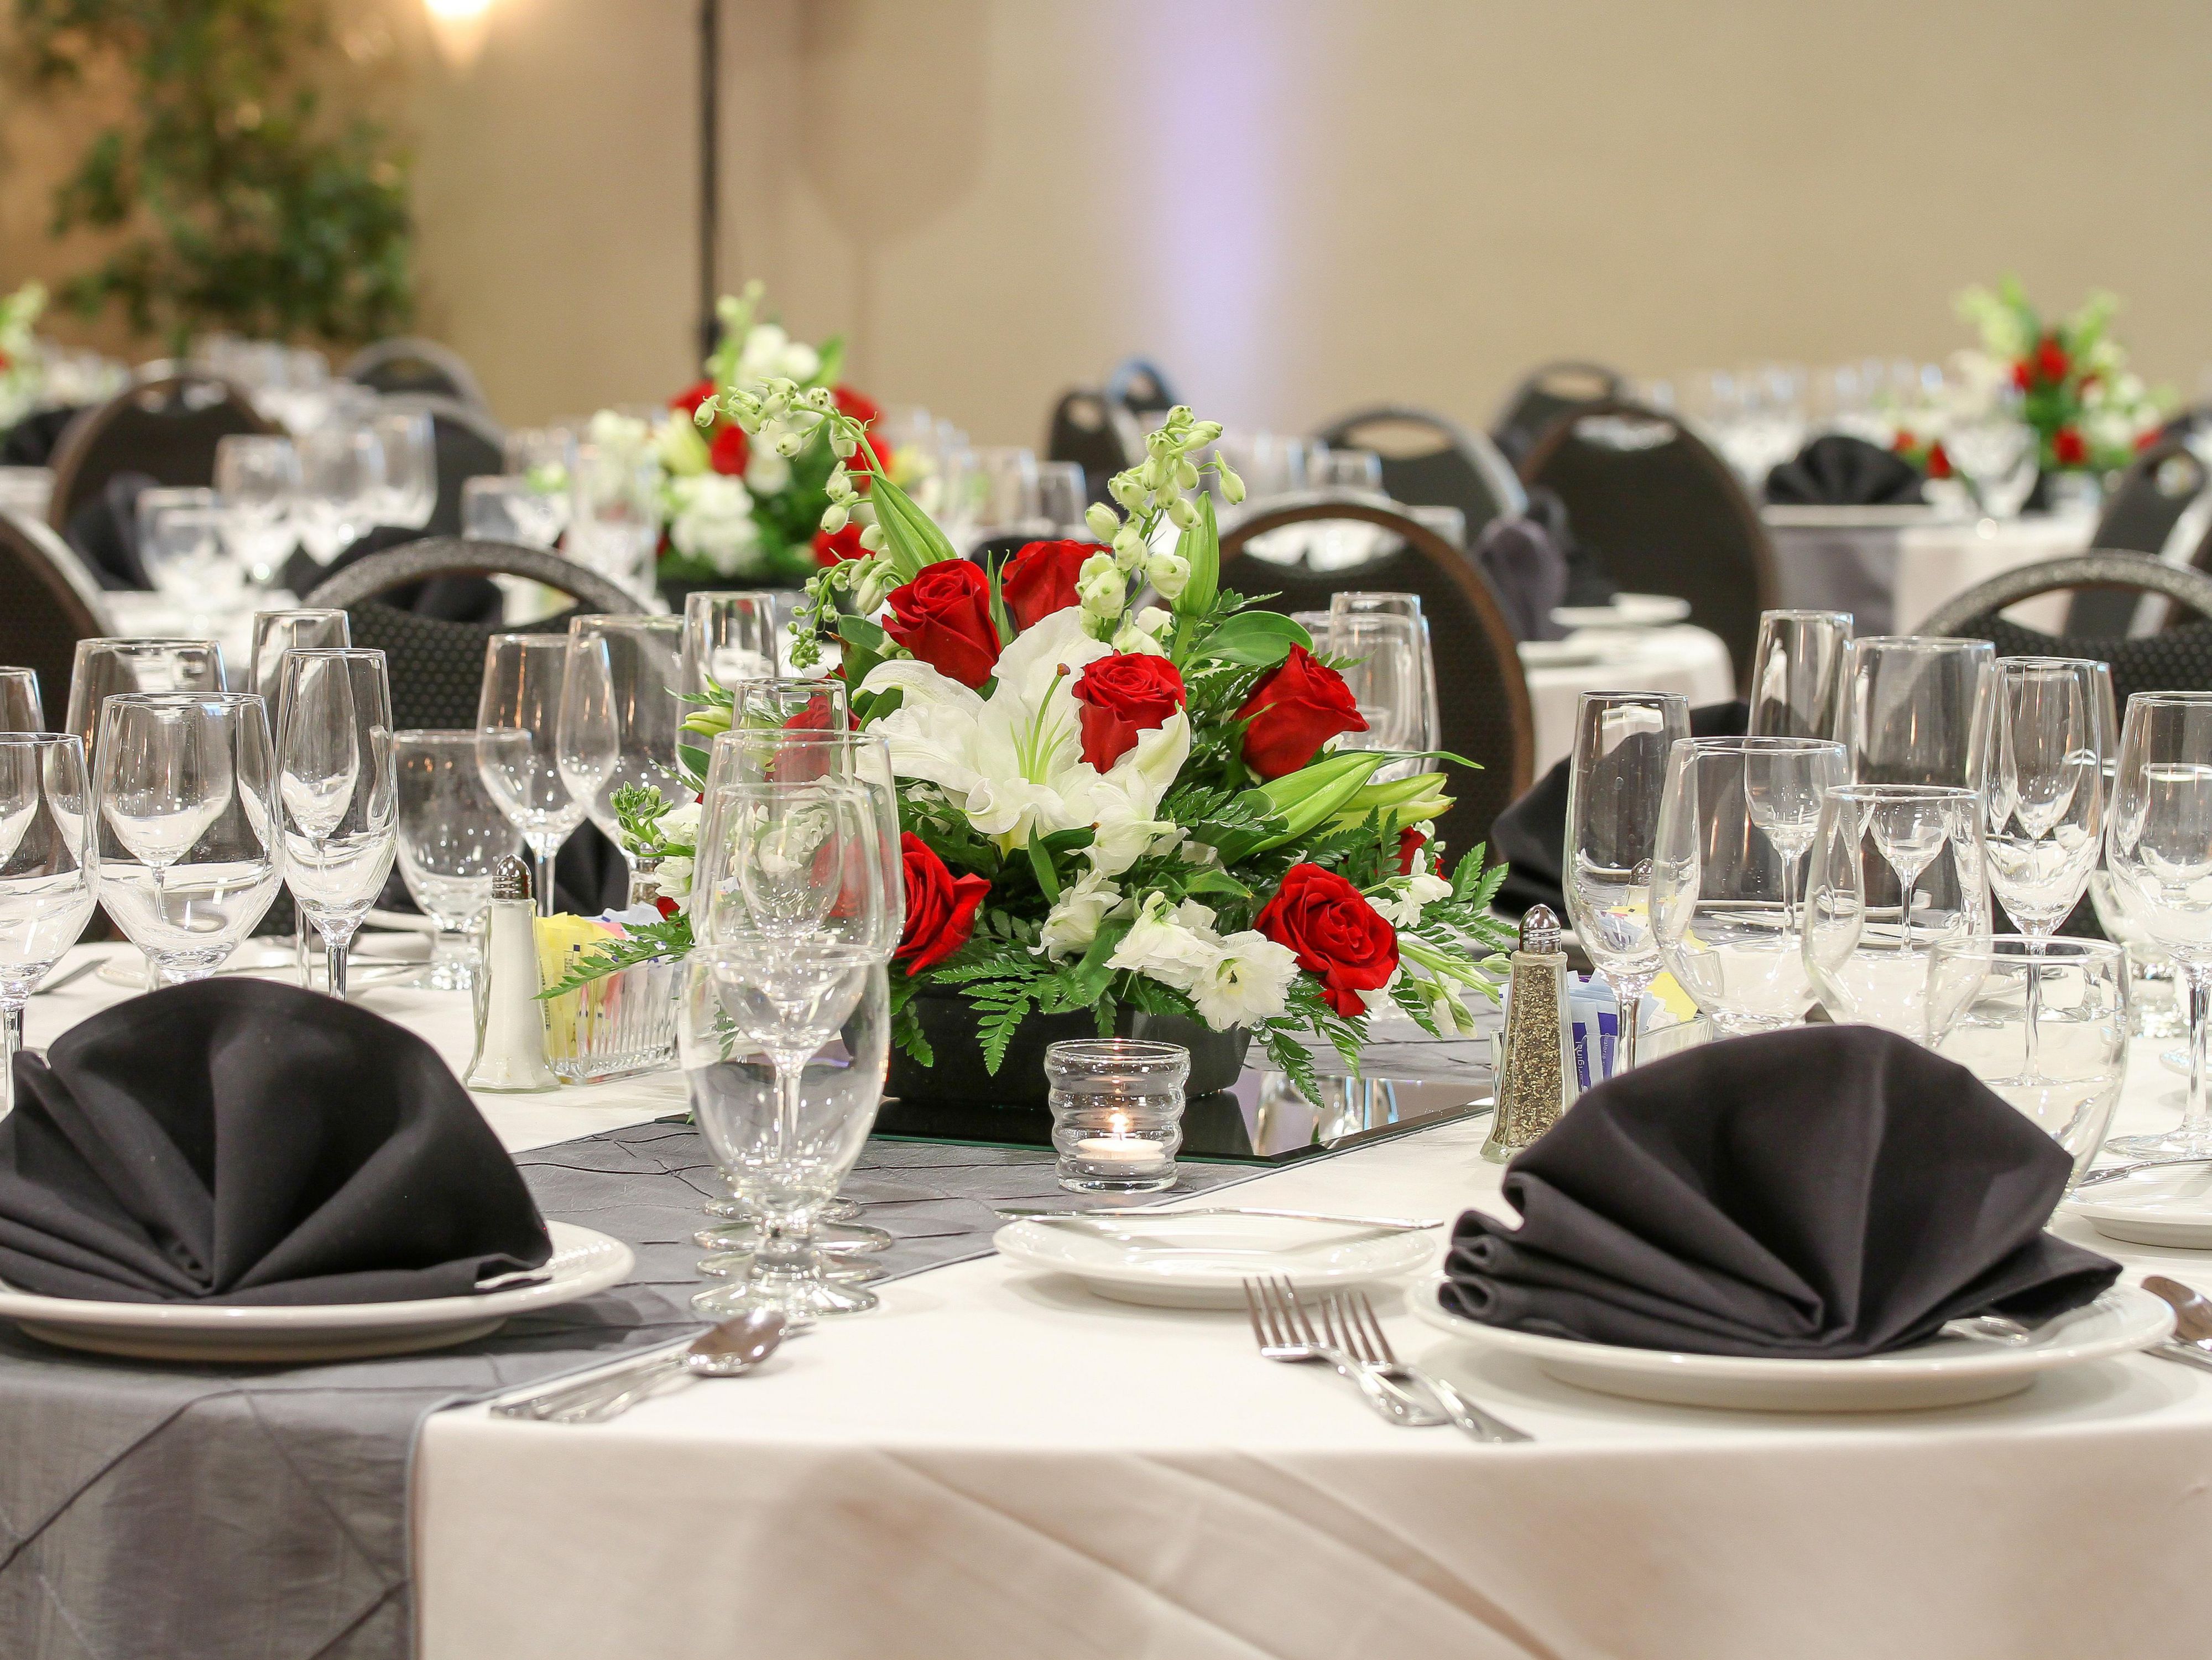 The hotel features 7500 sq. ft. of flexible meeting space and can accommodate conferences, seminars, meetings and banquets. Special rates are available for groups with 10 or more sleeping rooms. Our dedicated food and beverage team will work hard to ensure a memorable event.